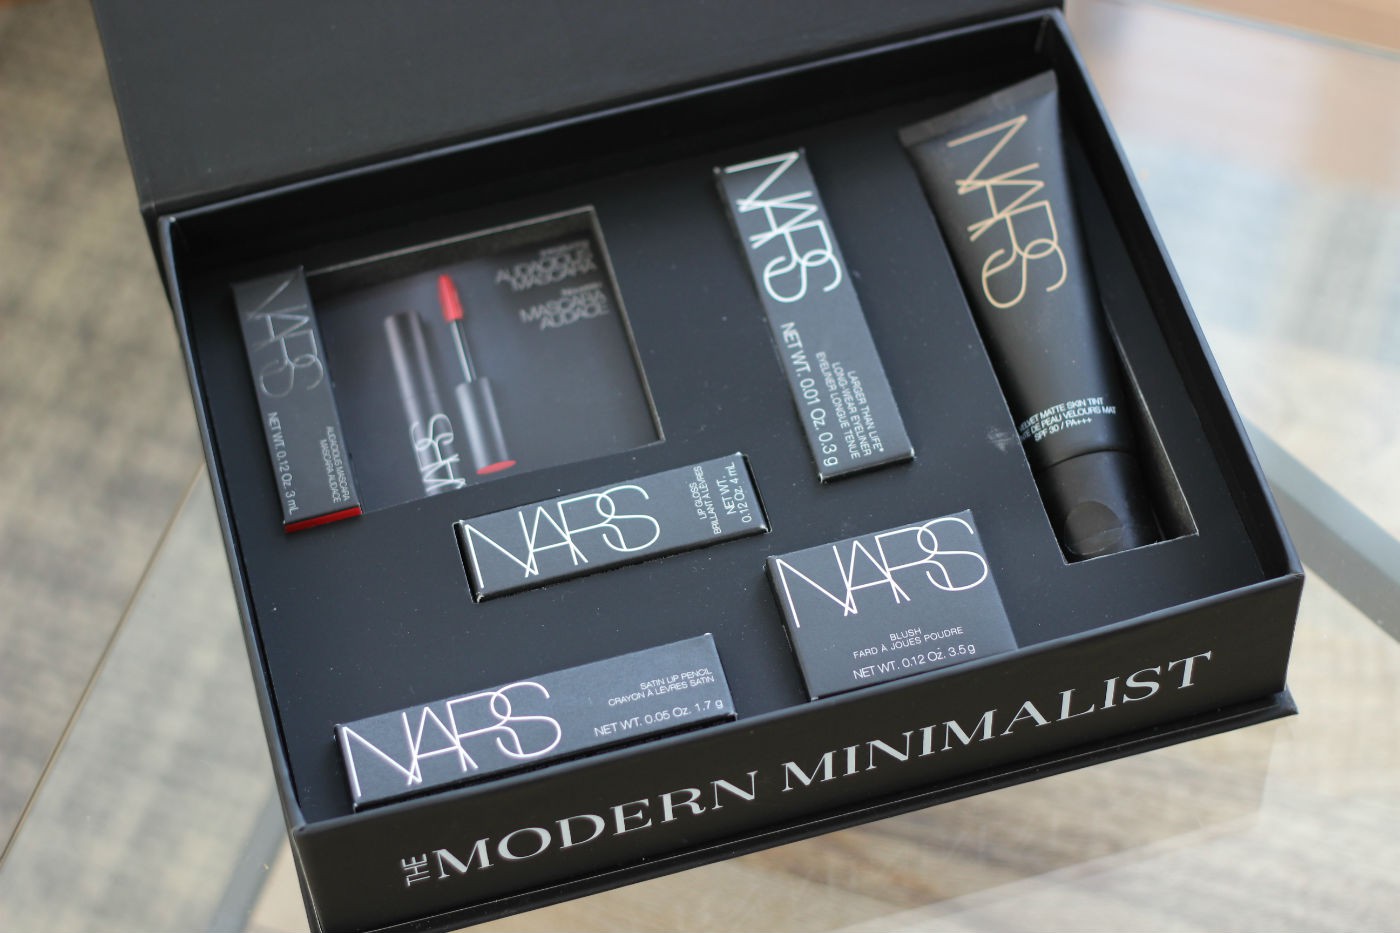 LIMITED EDITION NARS BEAUTY BOX SPACE NK Lily Pebbles